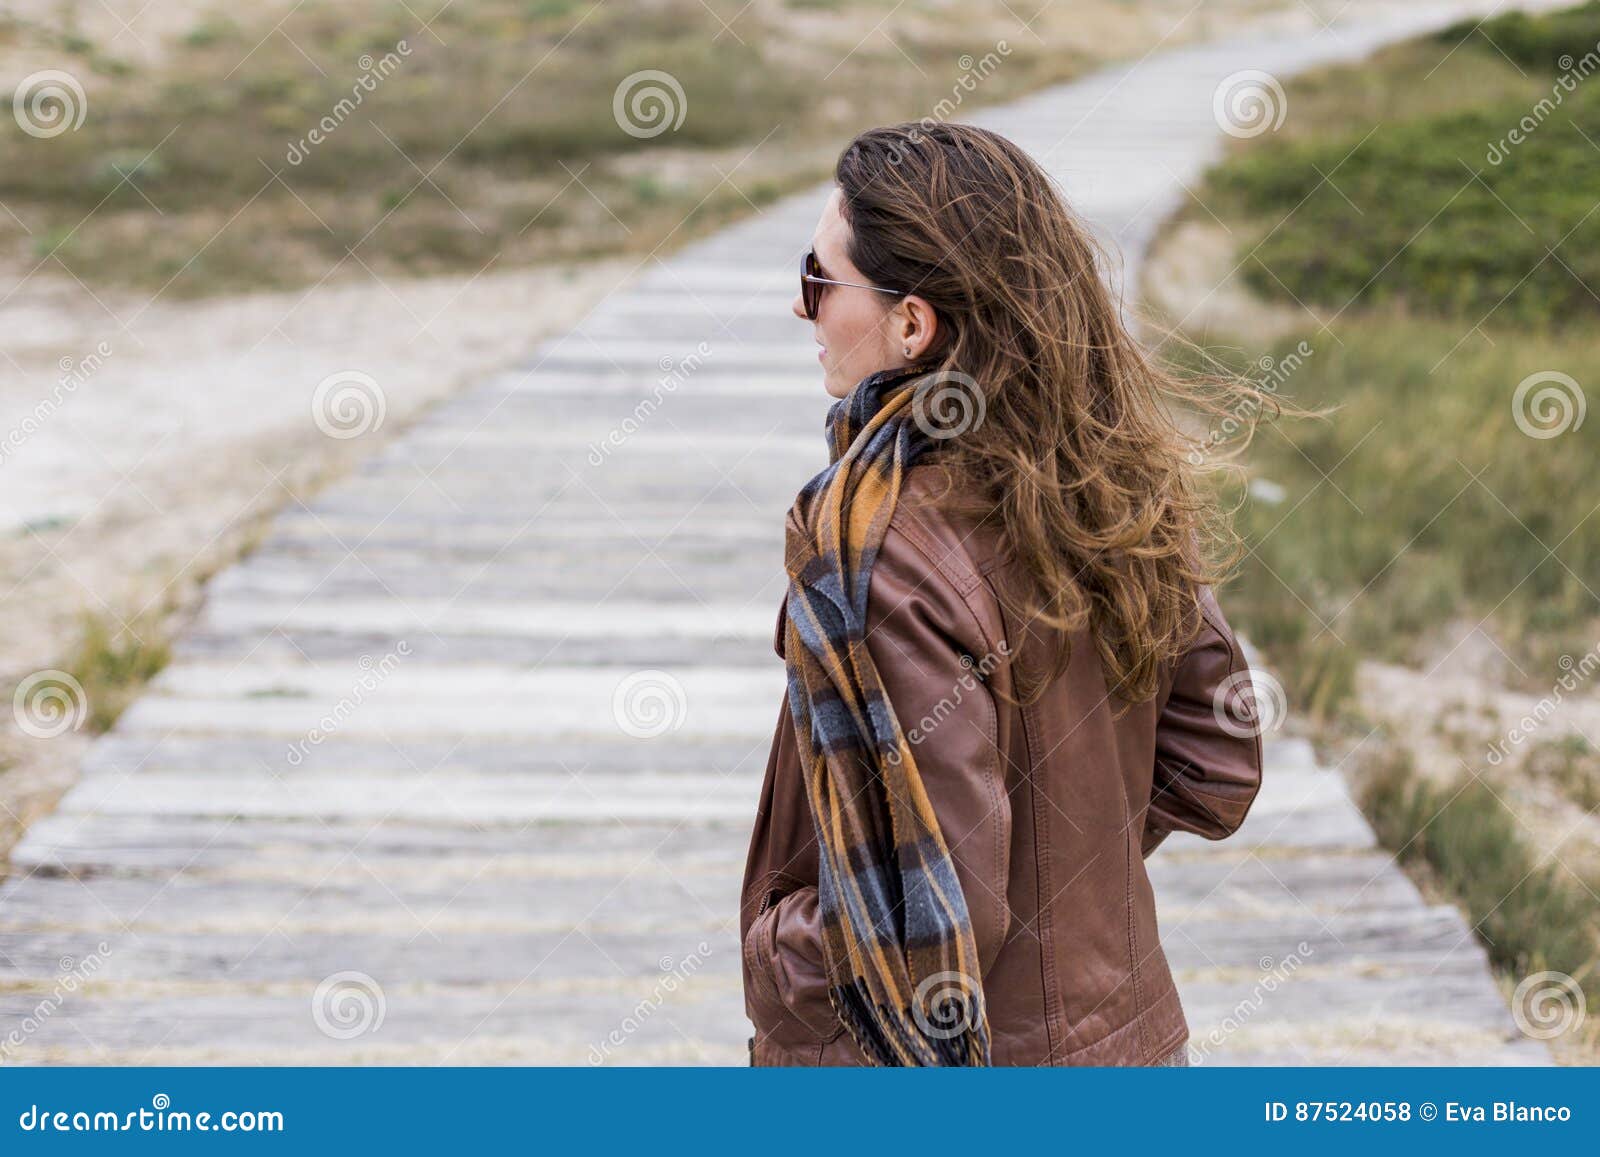 young woman outdoors portrait on a windy day